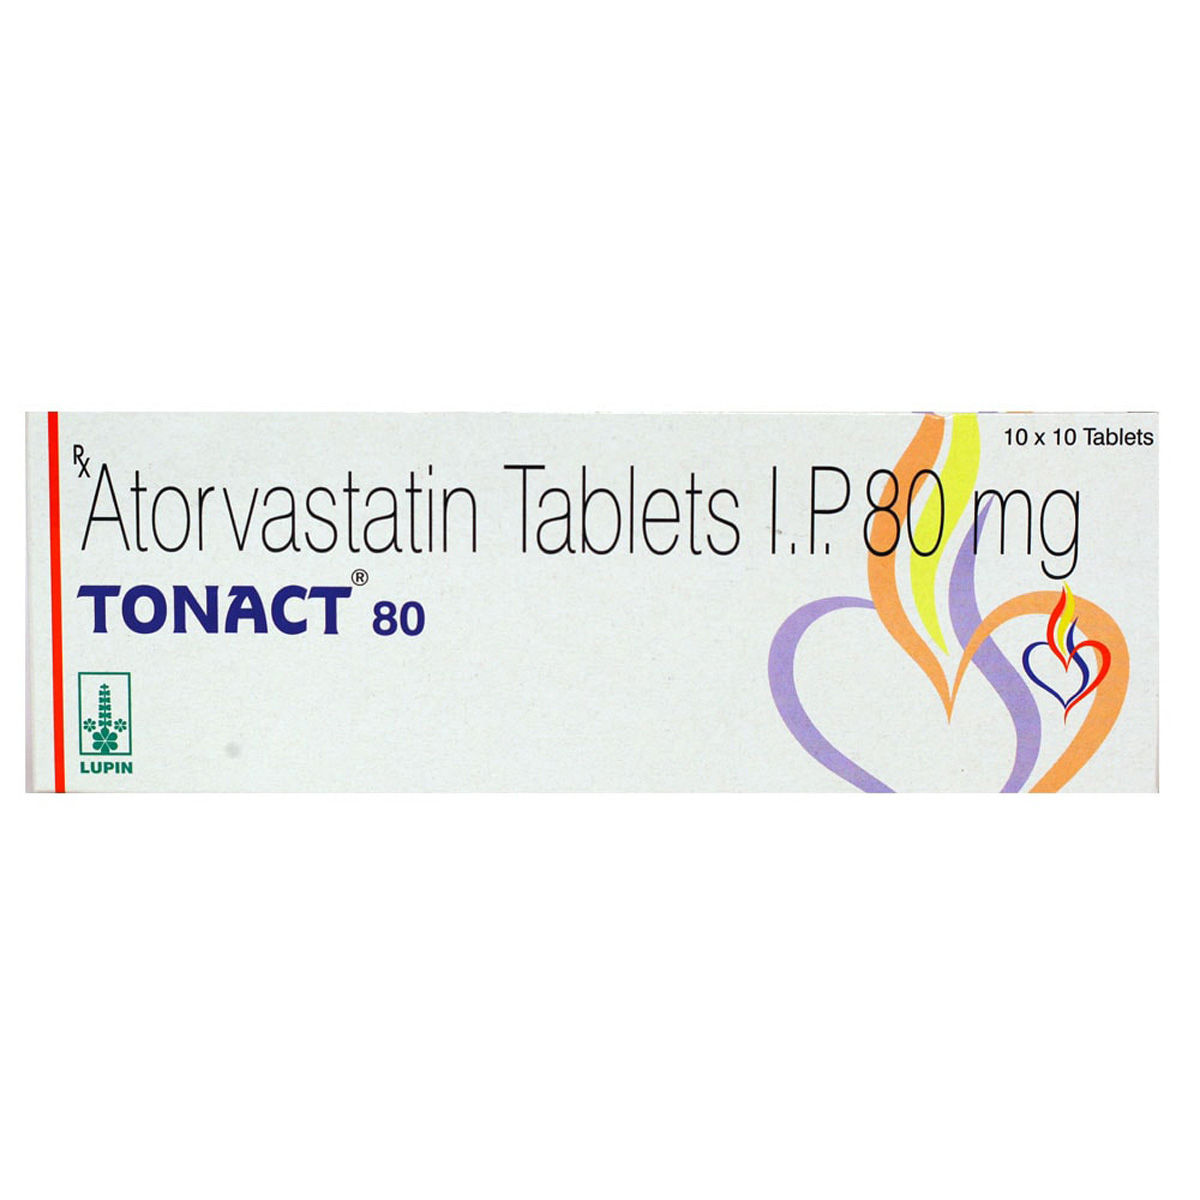 Tonact 80 Tablet 10's, Pack of 10 TABLETS